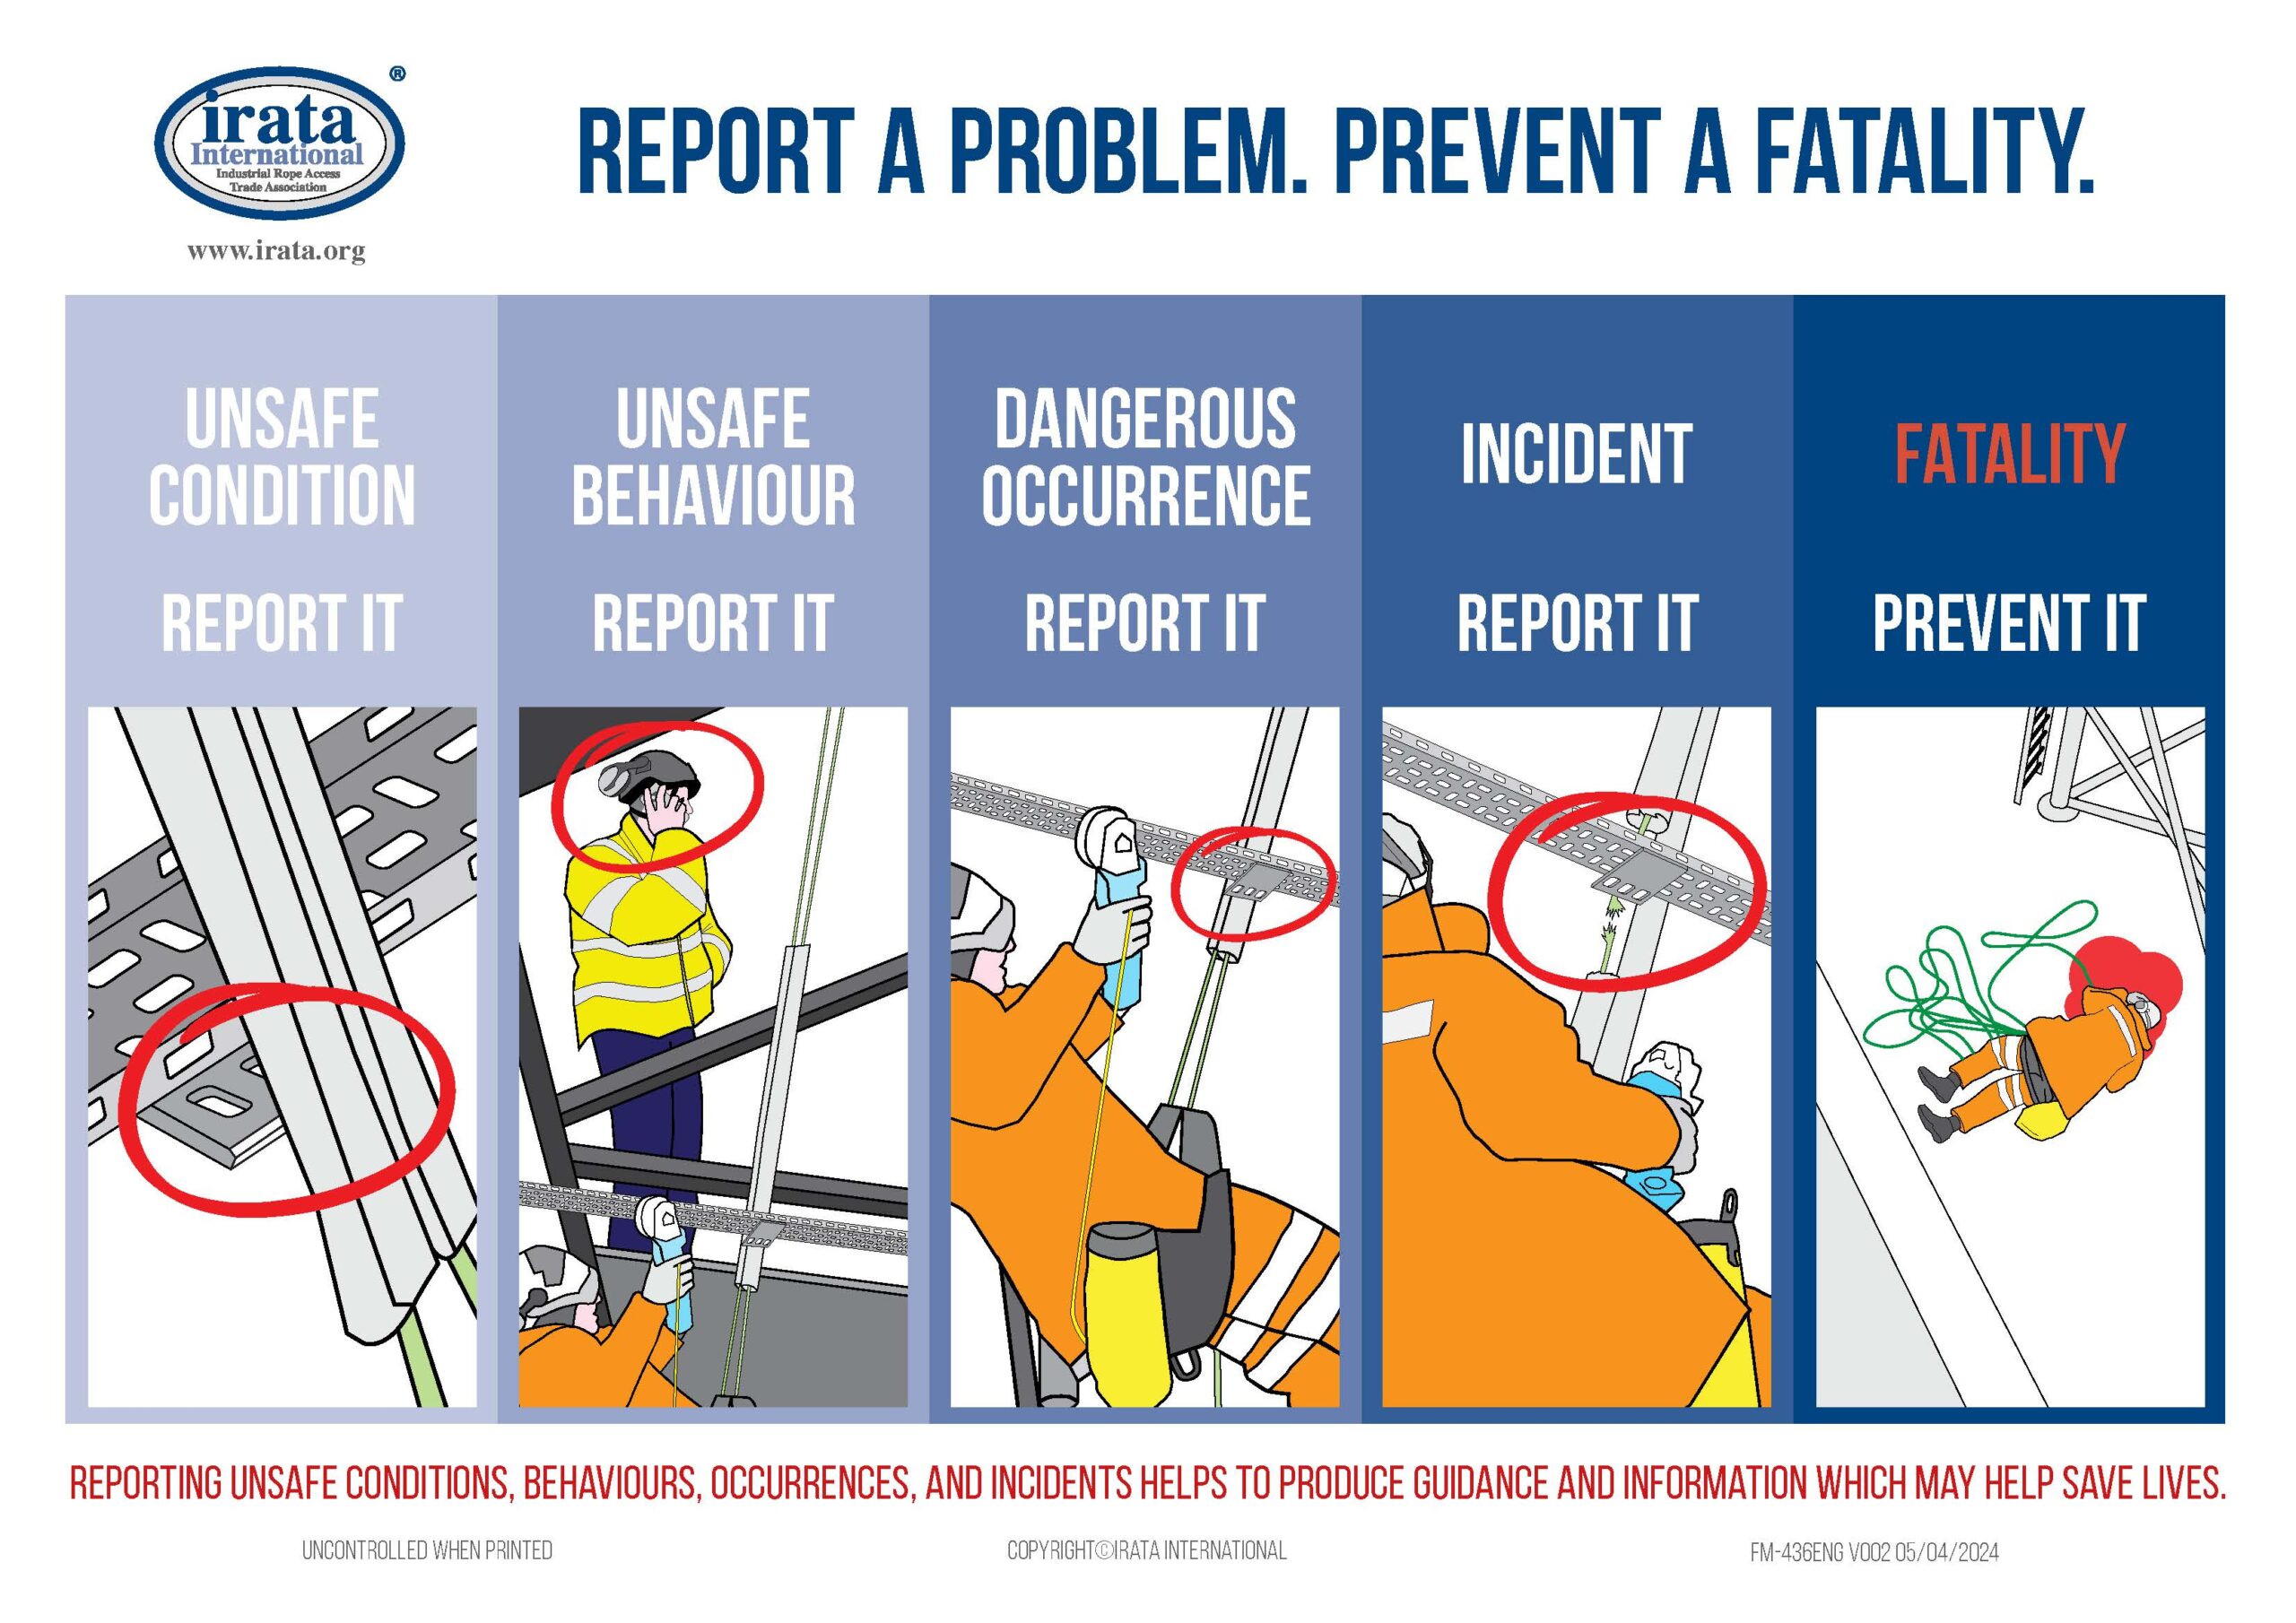 Poster about preventing a fatality